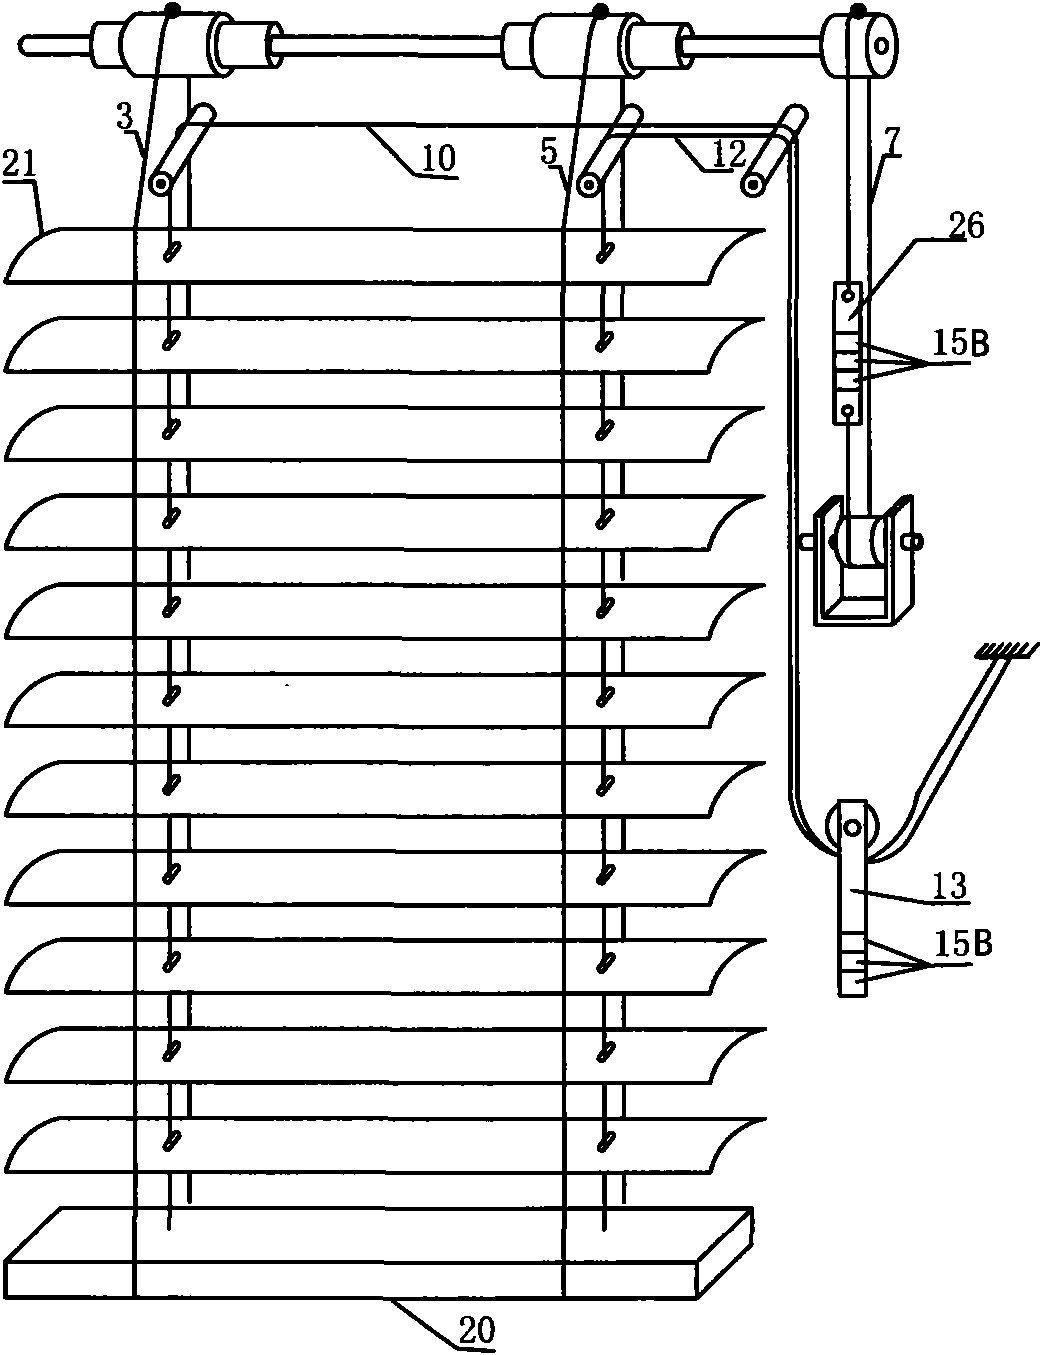 Electric control mechanism of internal sunshade product of hollow glass